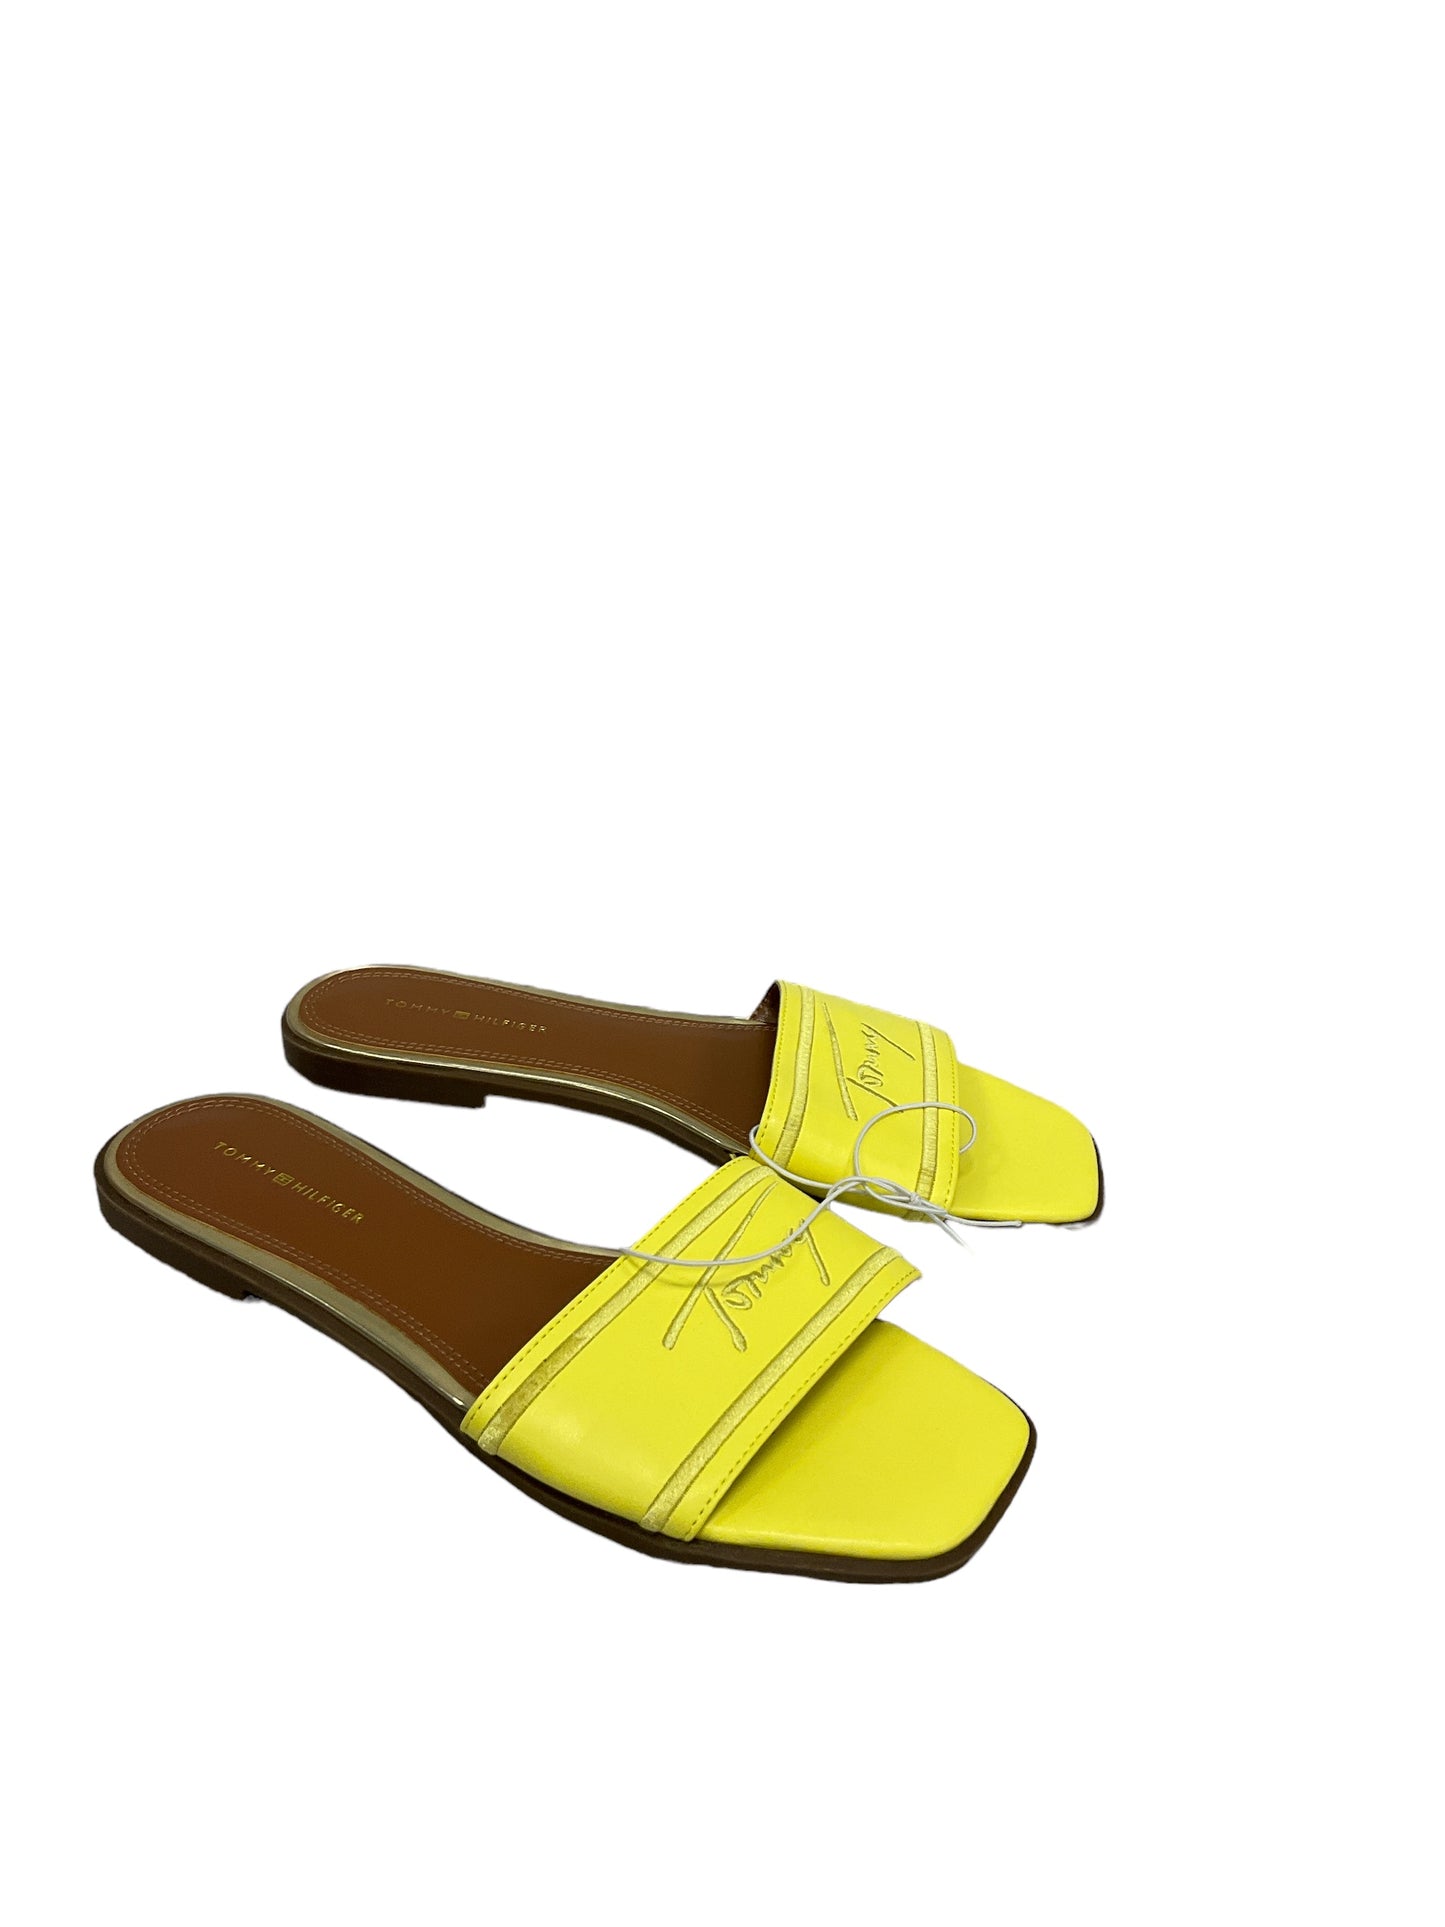 Sandals Flats By Tommy Hilfiger  Size: 8.5